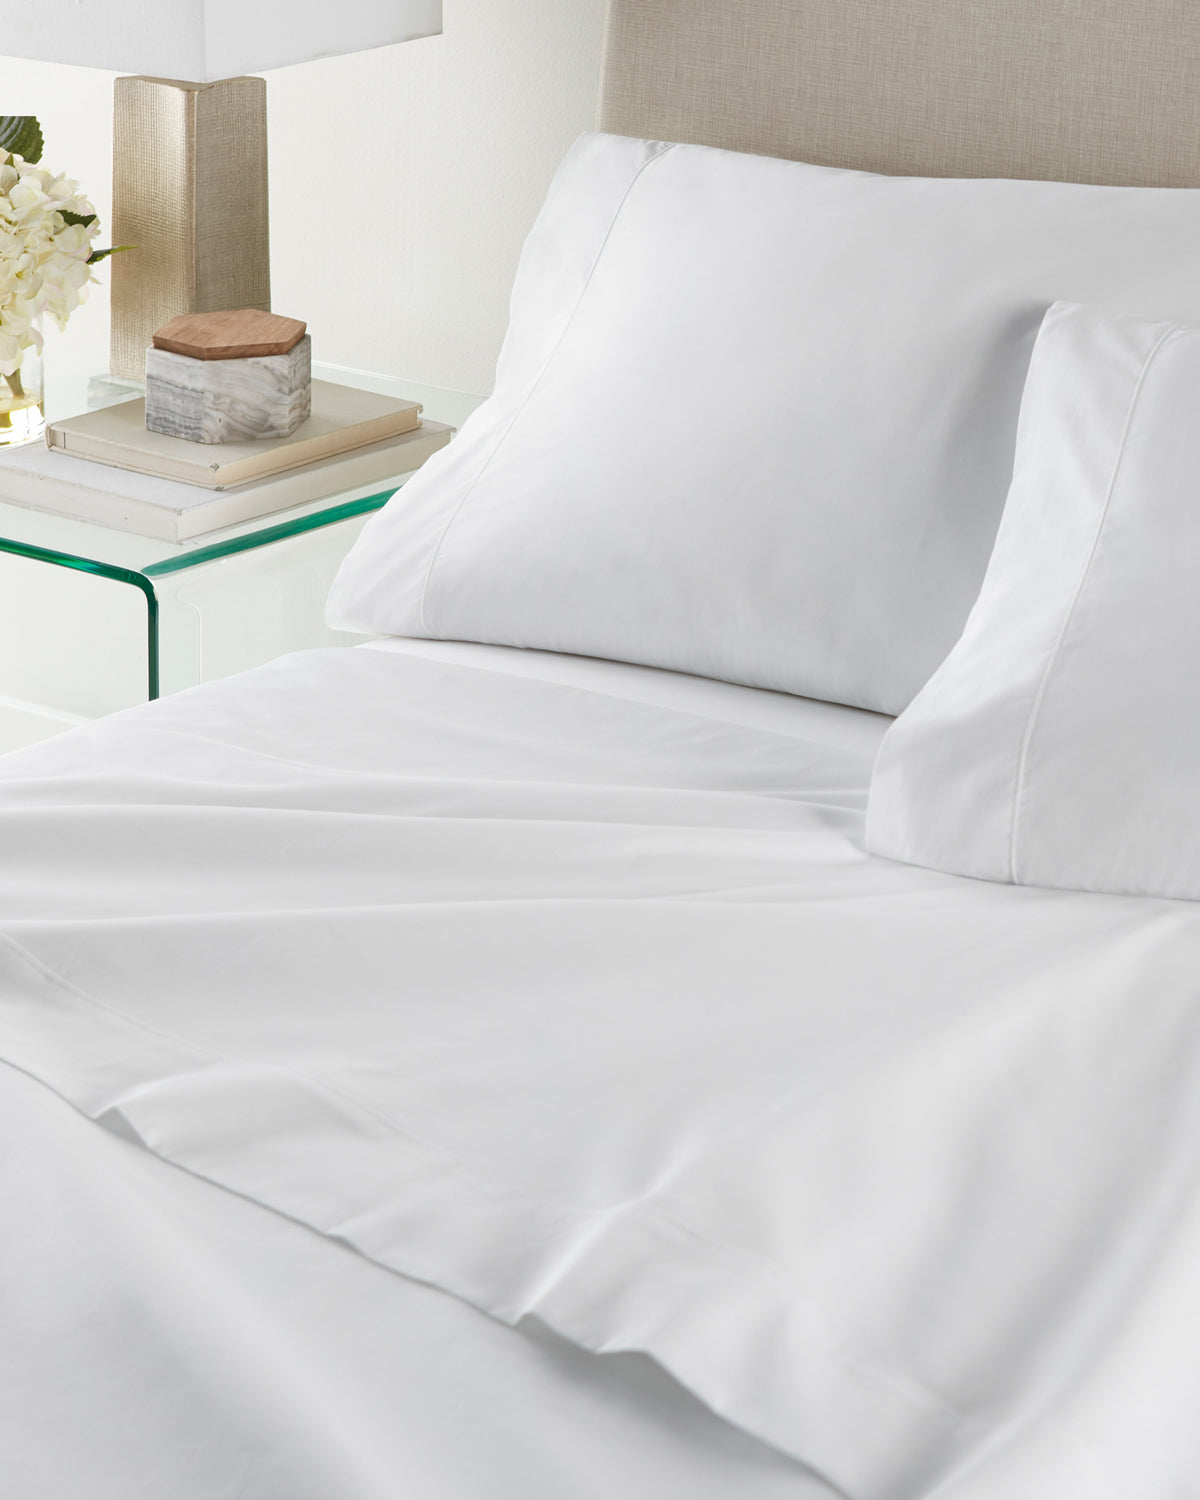 How to Wash Bed Sheets: The Complete Guide to Keeping Them Brand New